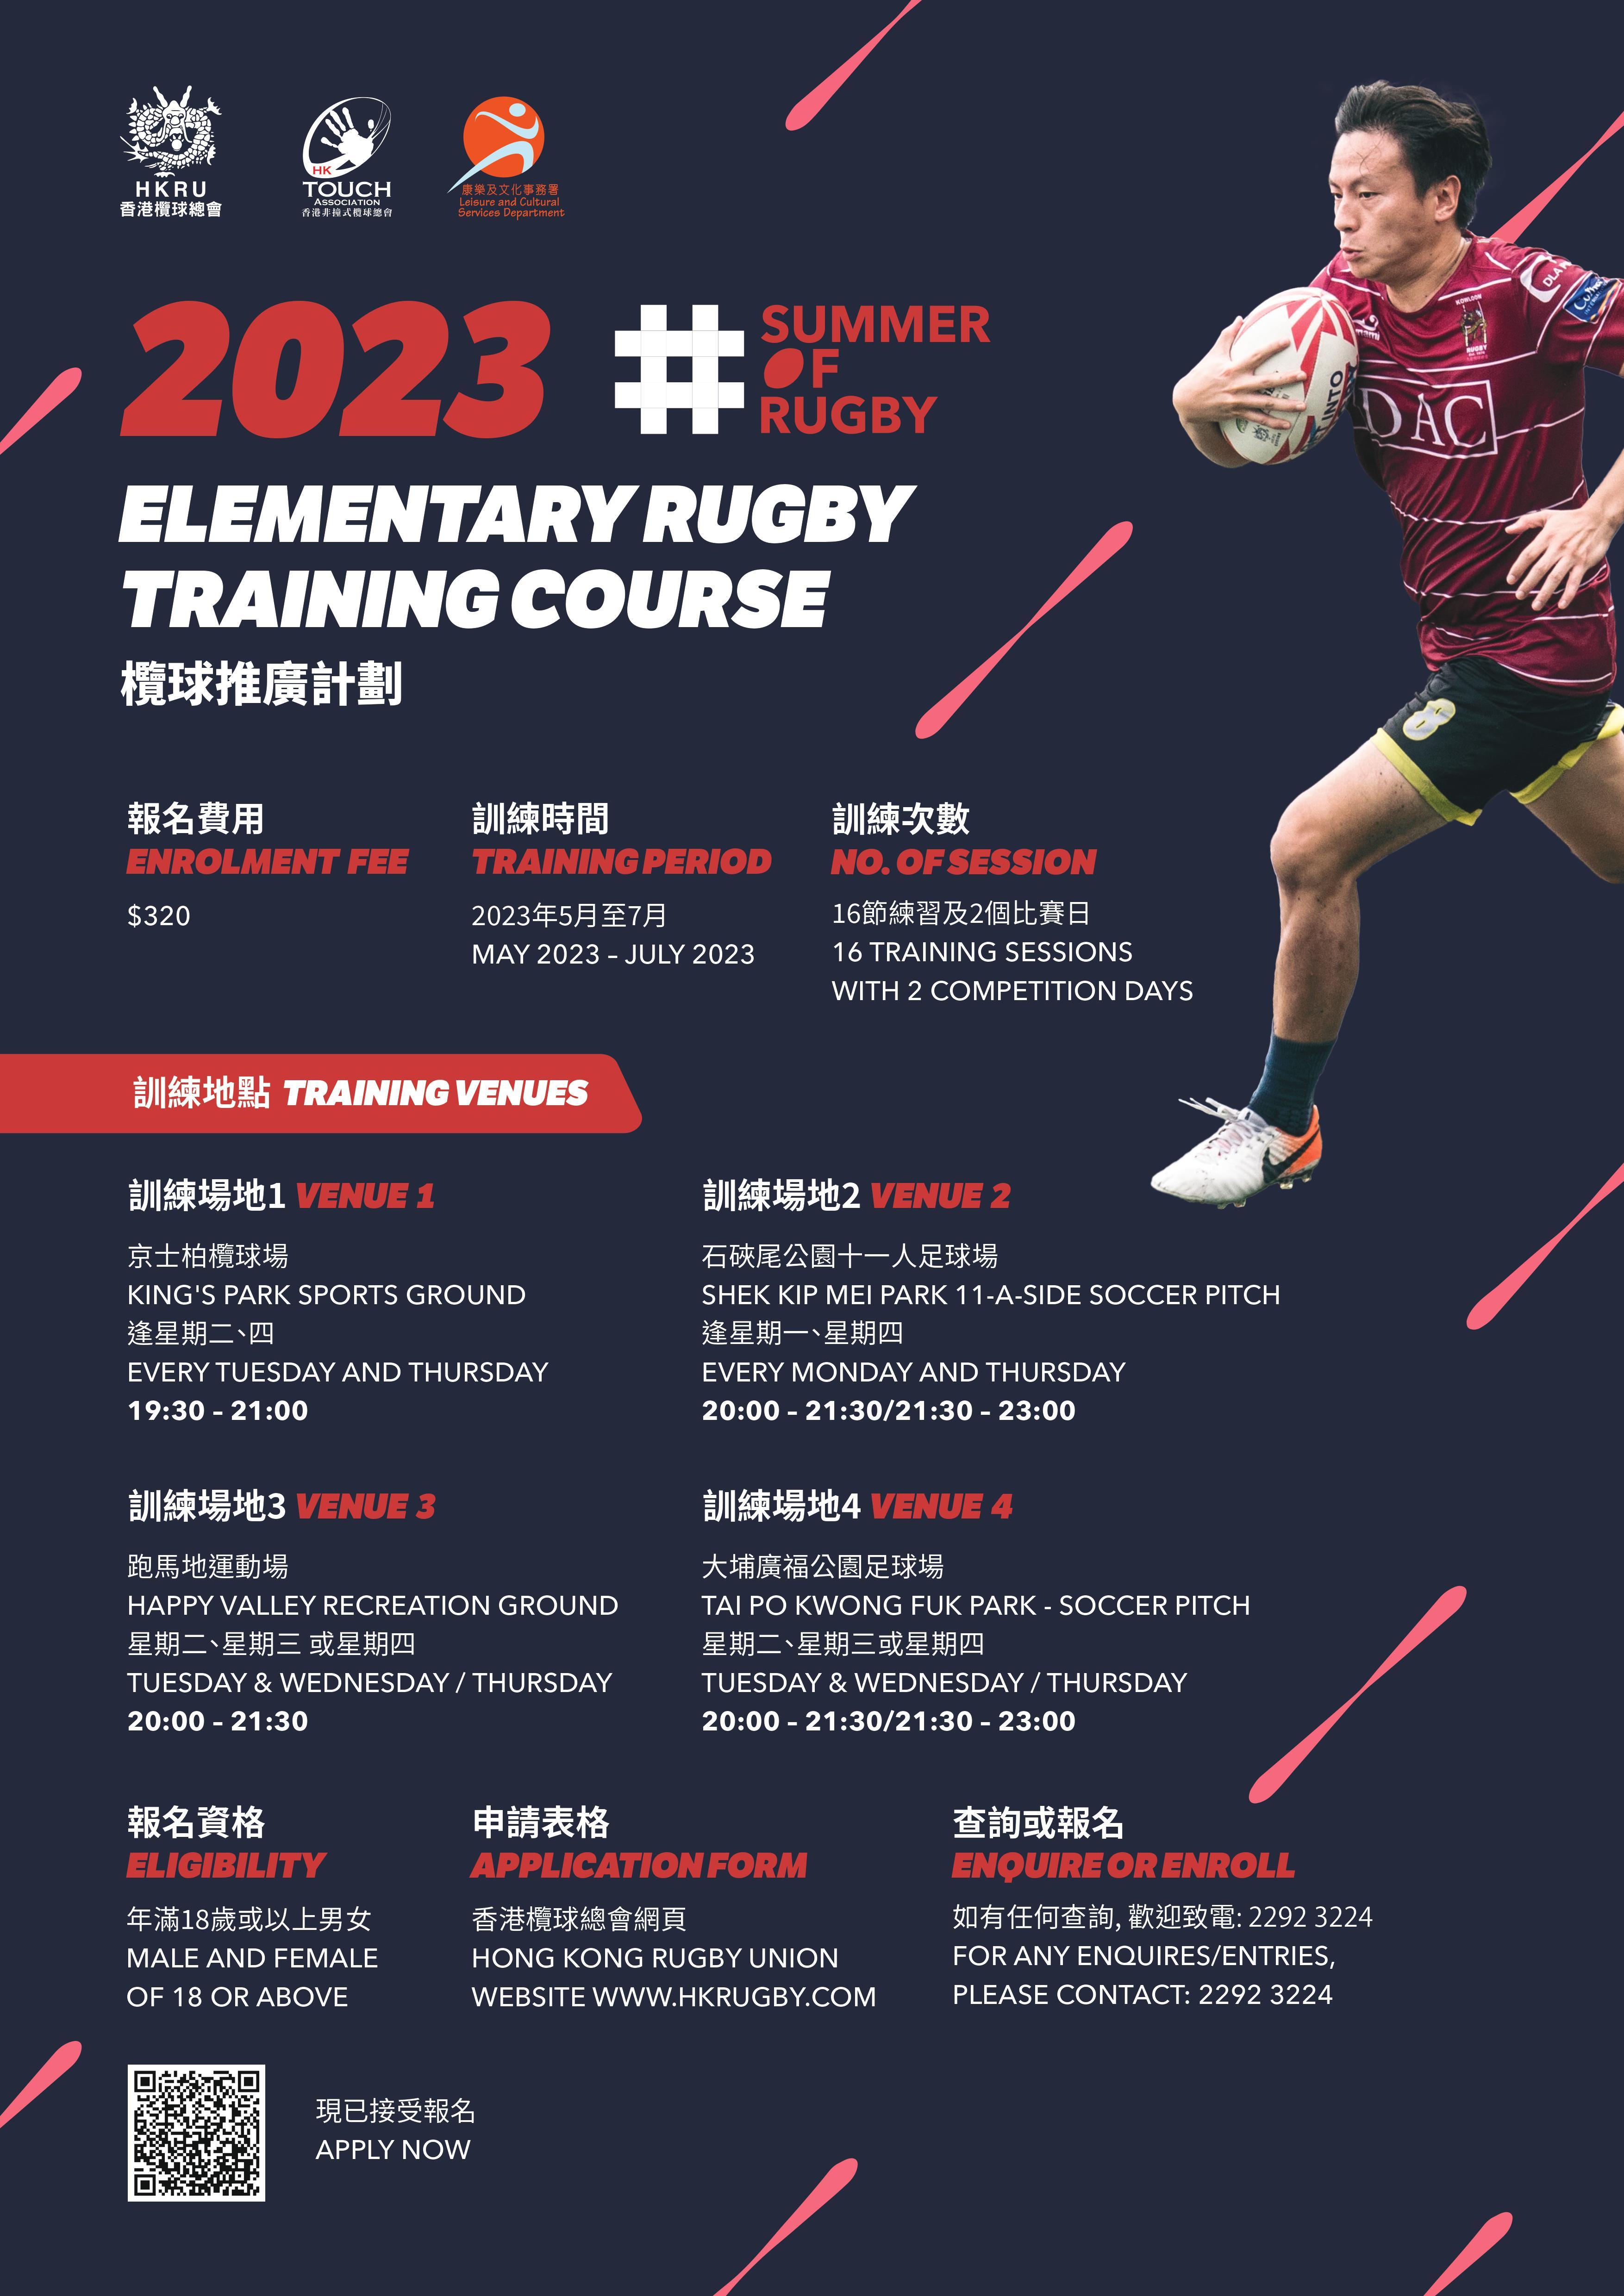 Elementary Rugby Training Course 2023 thumbnail